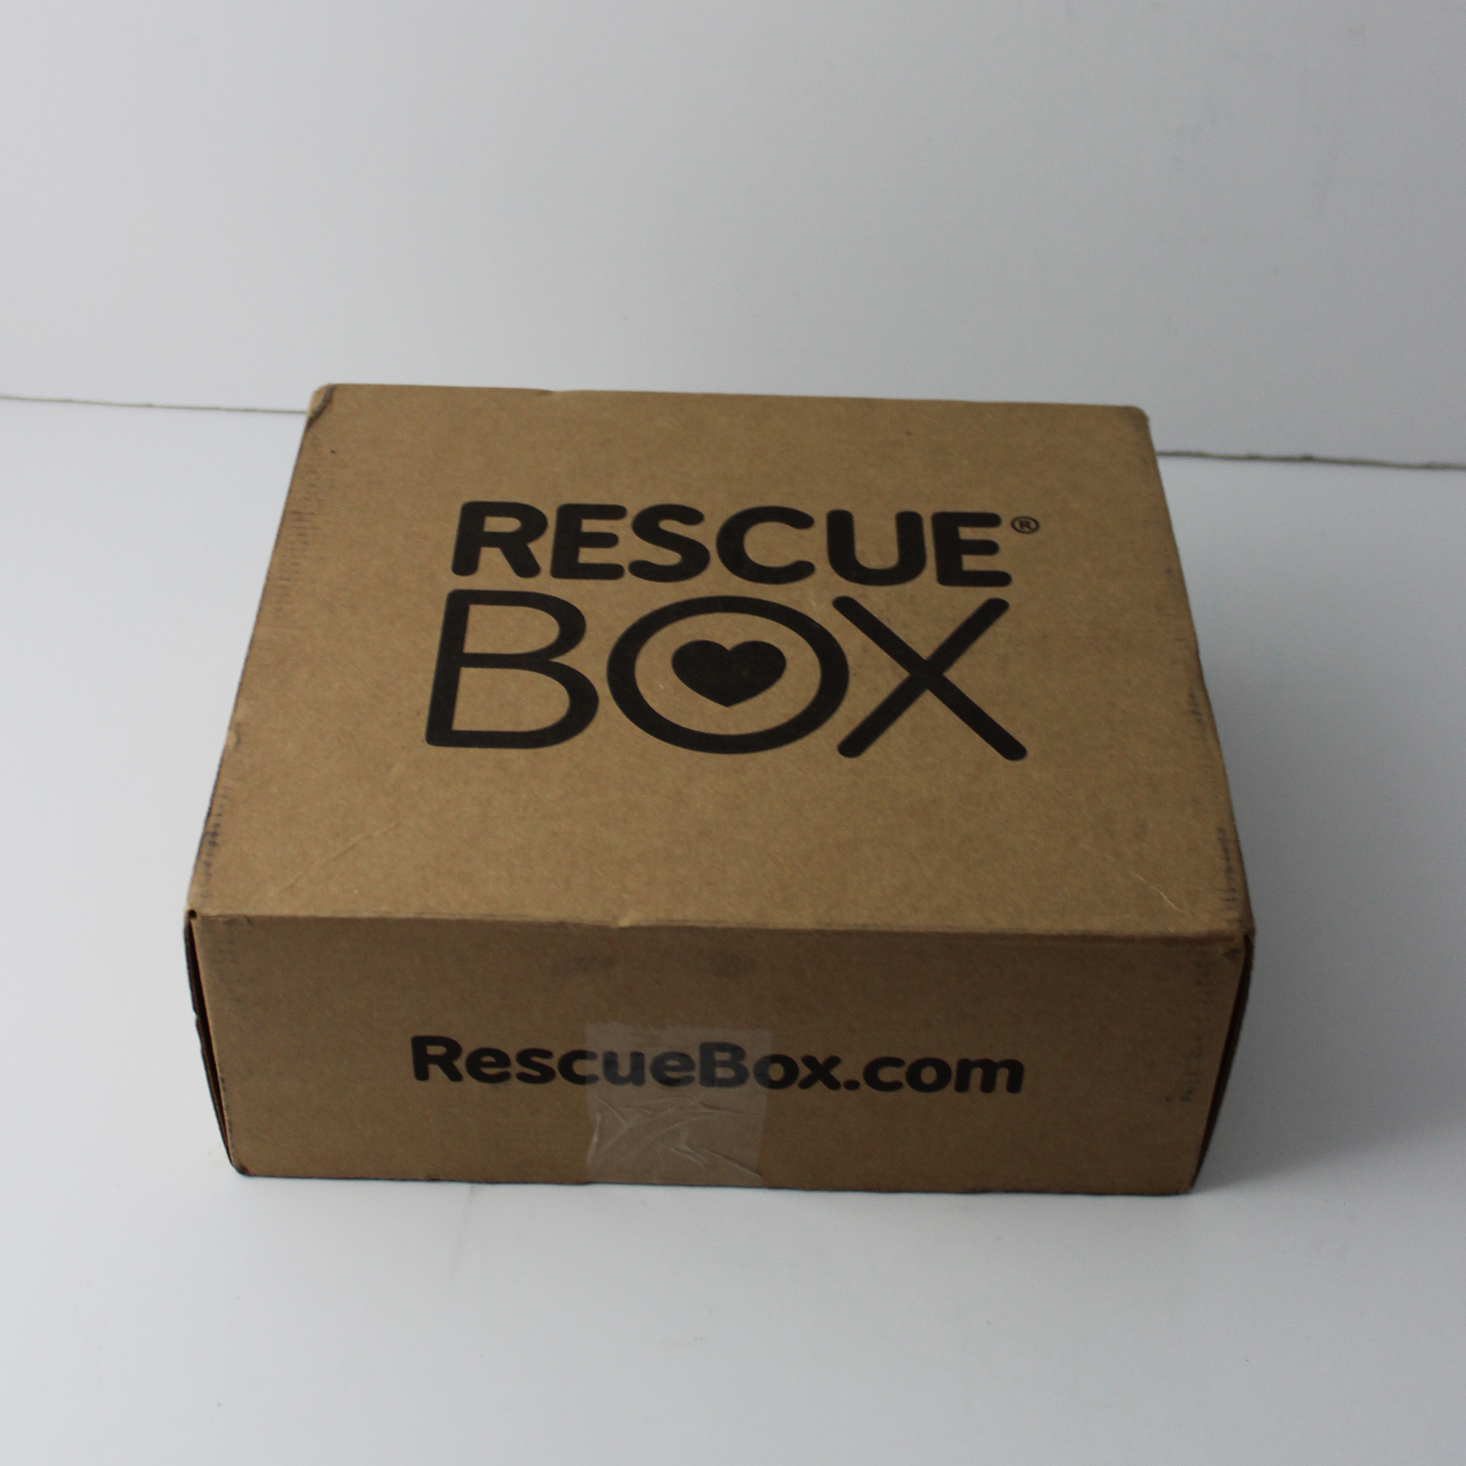 RescueBox Dog Subscription Box Review – August 2018